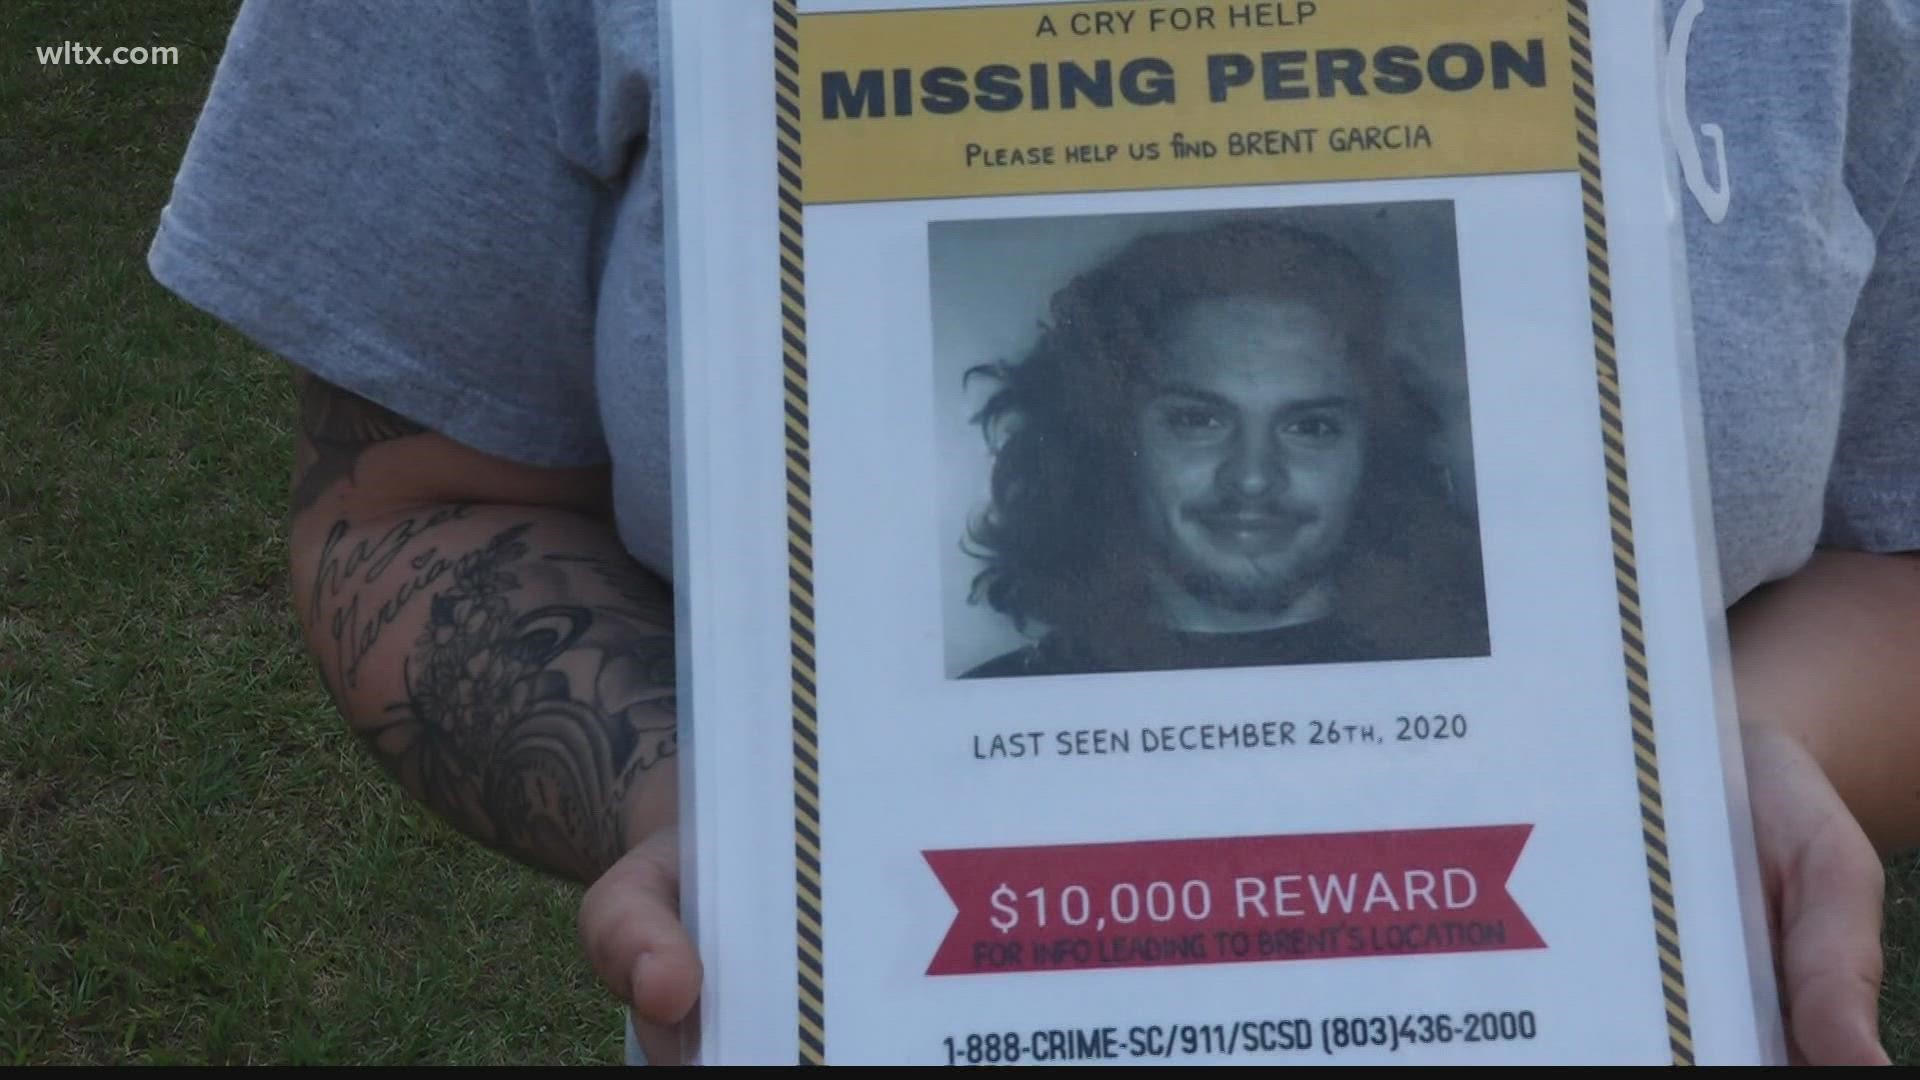 On what would have been Brent Garcia's 20th birthday, his family has organized a search for Brent or clues to to his disappearance in December of 2020.